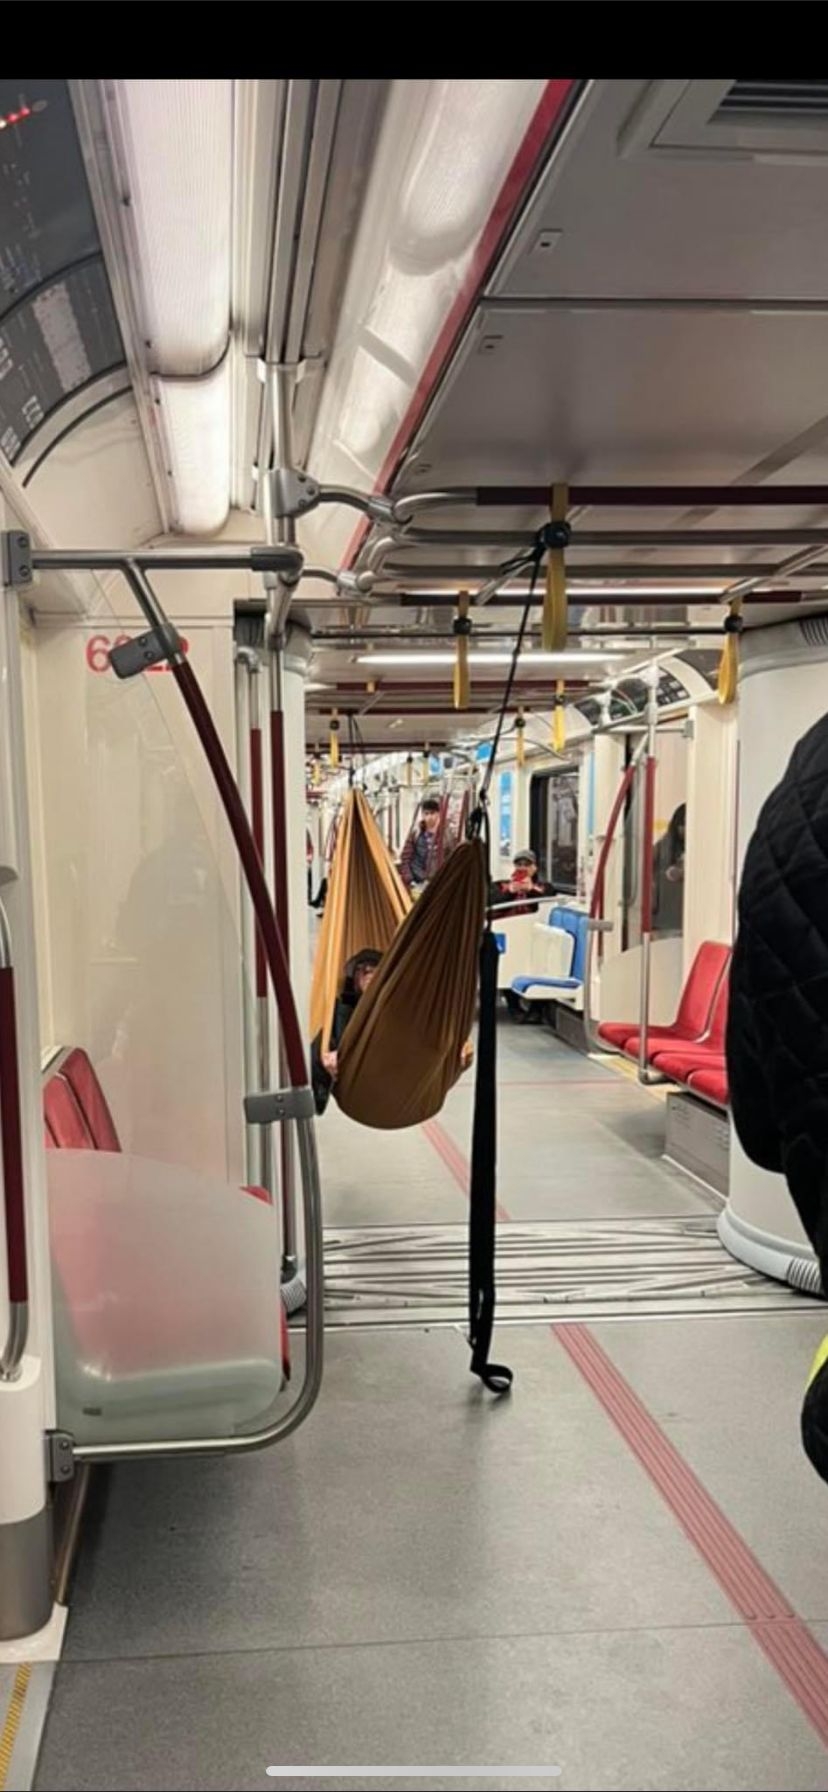 Just a Guy in his hammock on TTC